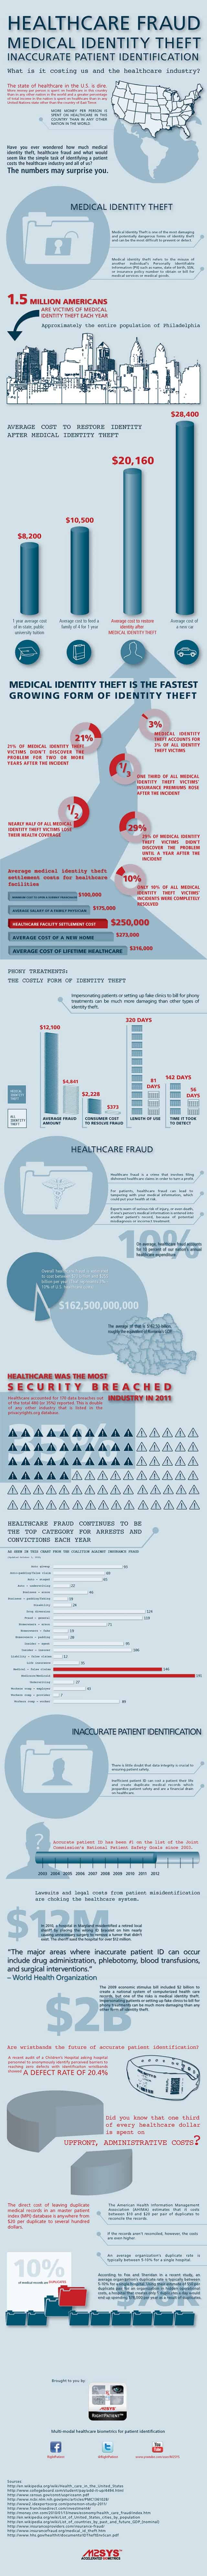 Infographic-on-medical-identity-theft-healthcare-fraud-and-patient-misidentification-s